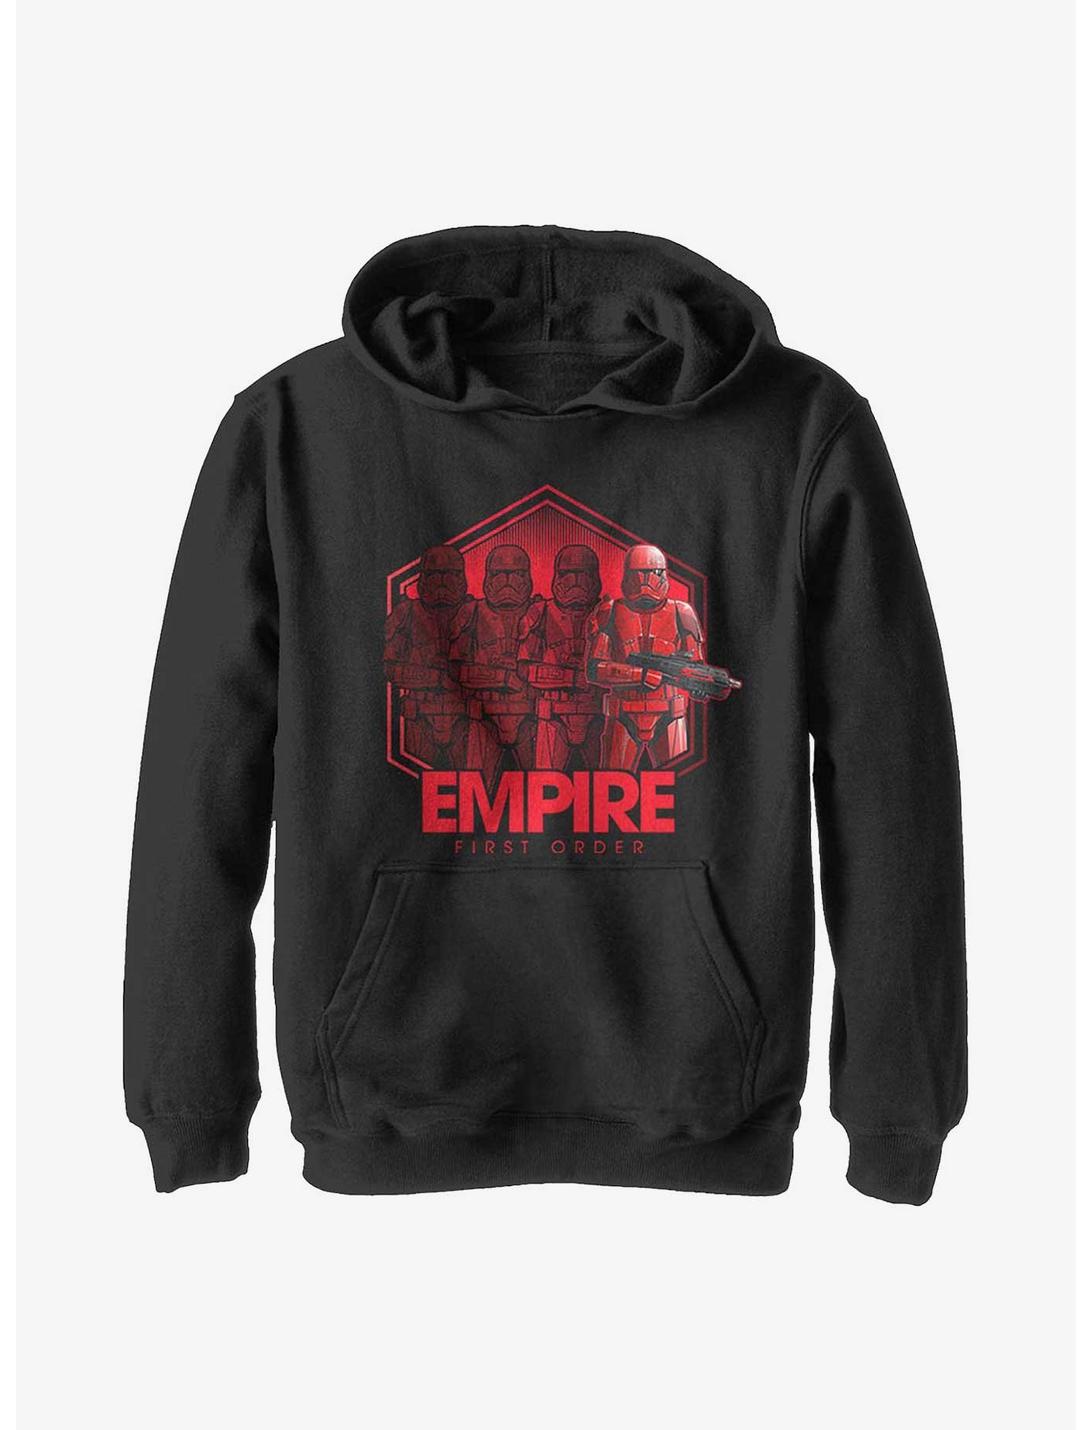 Plus Size Star Wars Episode IX: The Rise Of Skywalker Red Troop Four Youth Hoodie, BLACK, hi-res